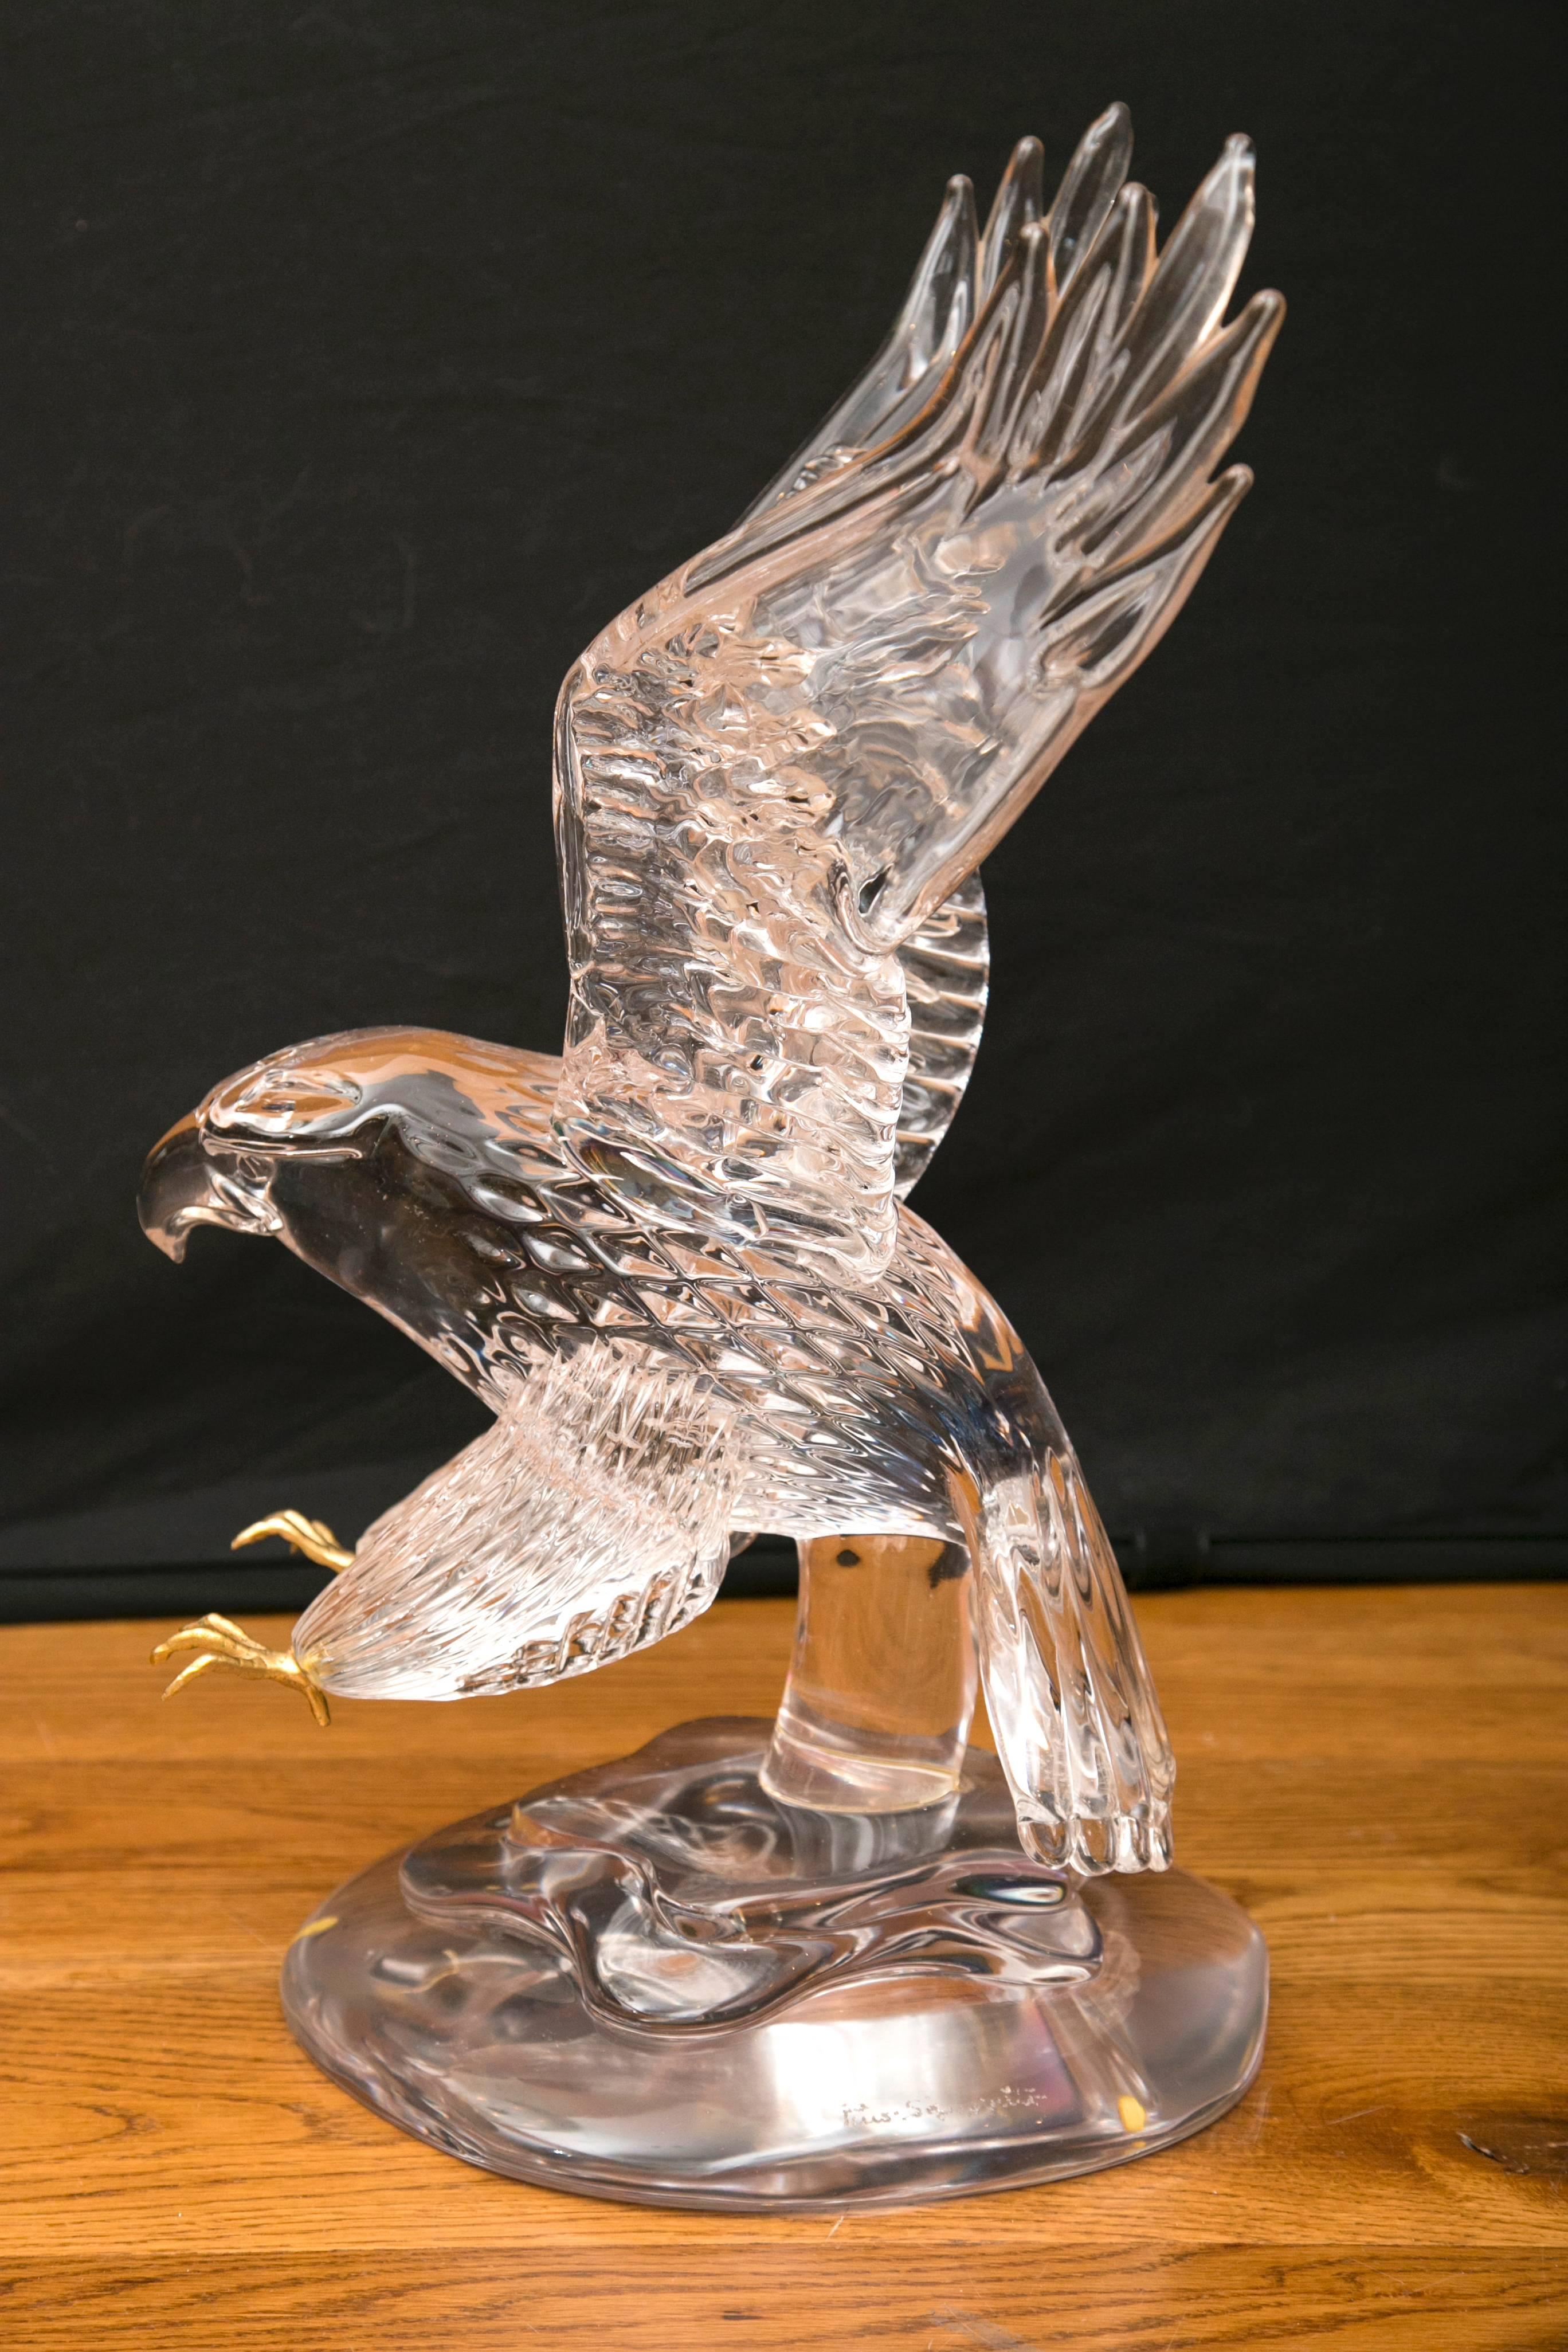 Vintage blown American eagle blown by only a master blower, Pino Signeretto, this detailed form appears as crystal and is blown in one solid form attached to a glass base, 50lbs atleast, signed.